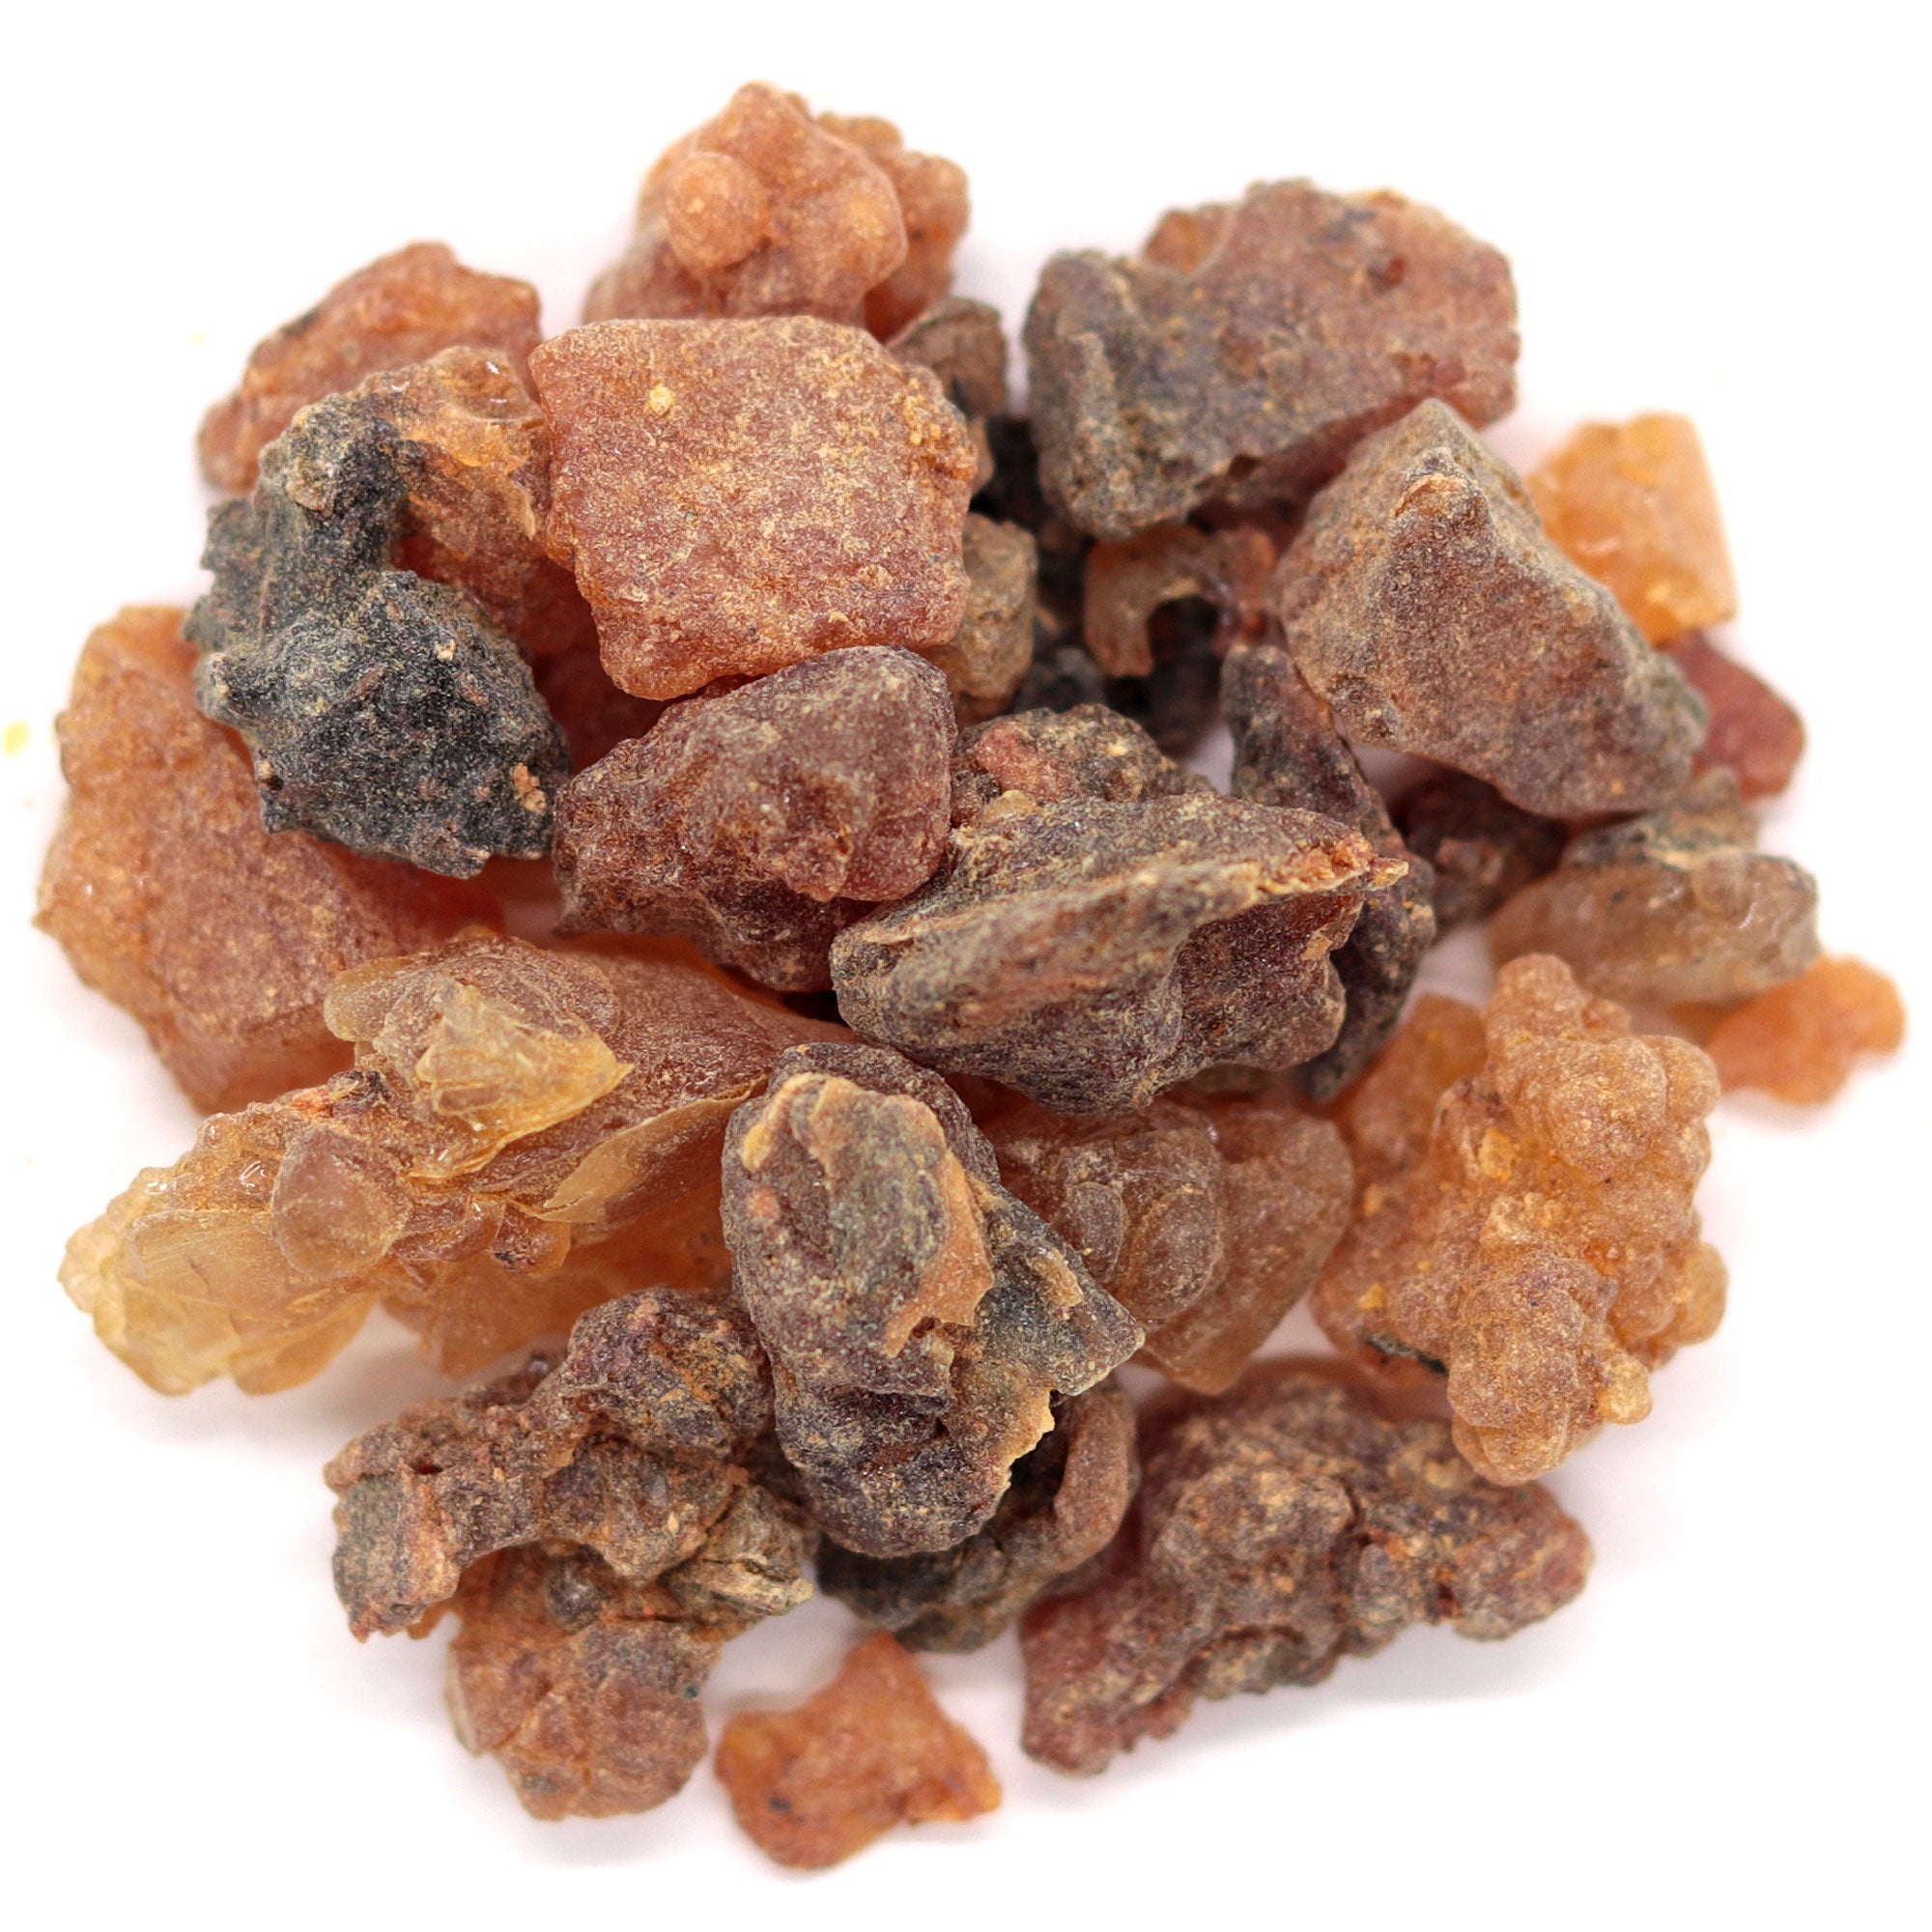 Frankincense and Myrrh Resin Incense 0.5 oz – Solo Therapy